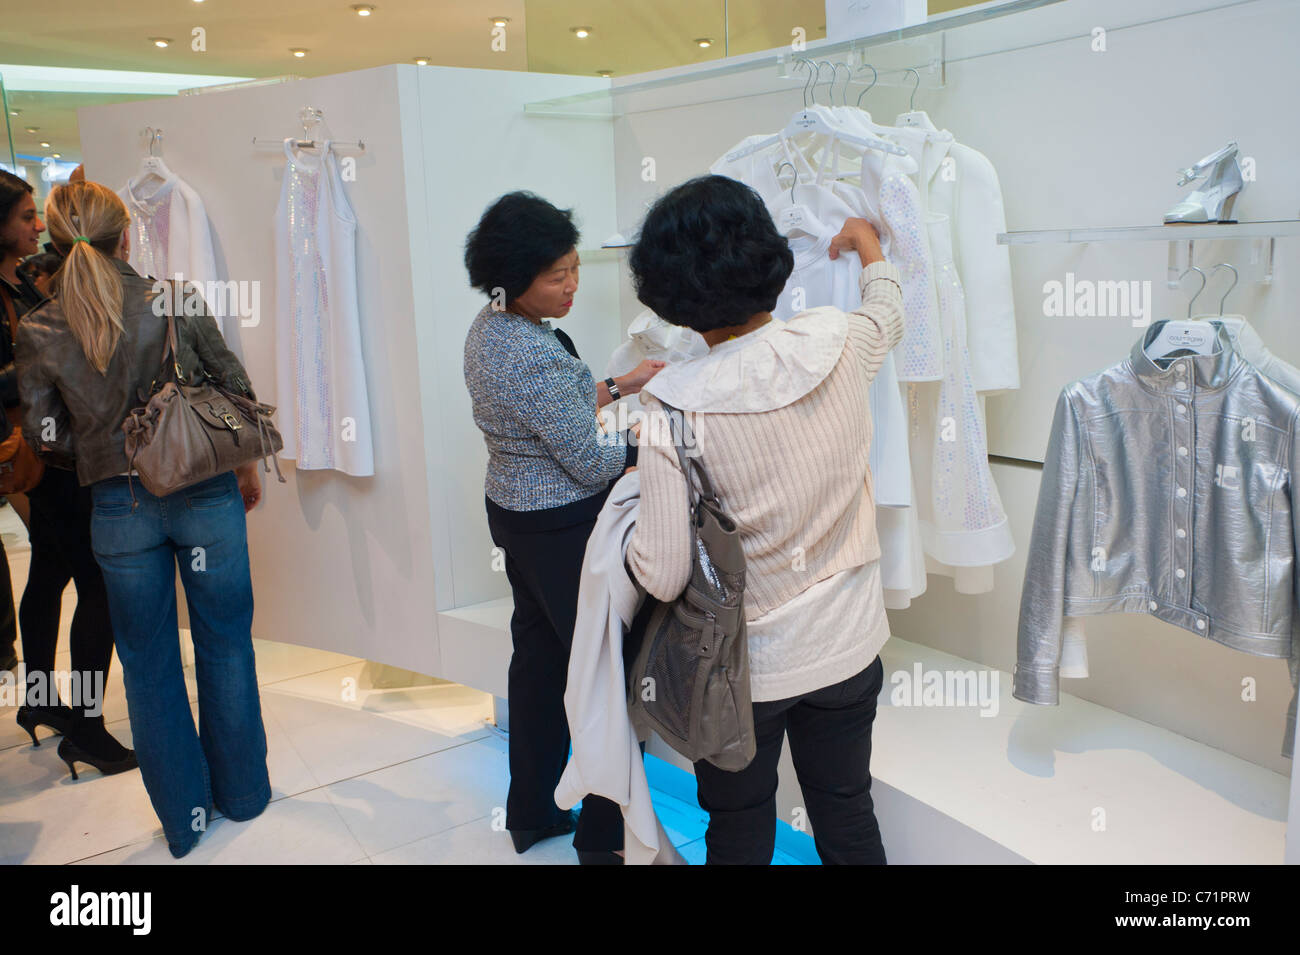 Paris, France, "Fashion Night", French African Women Shopping inside  Courreges Luxury Clothing Store, mode labels Stock Photo - Alamy